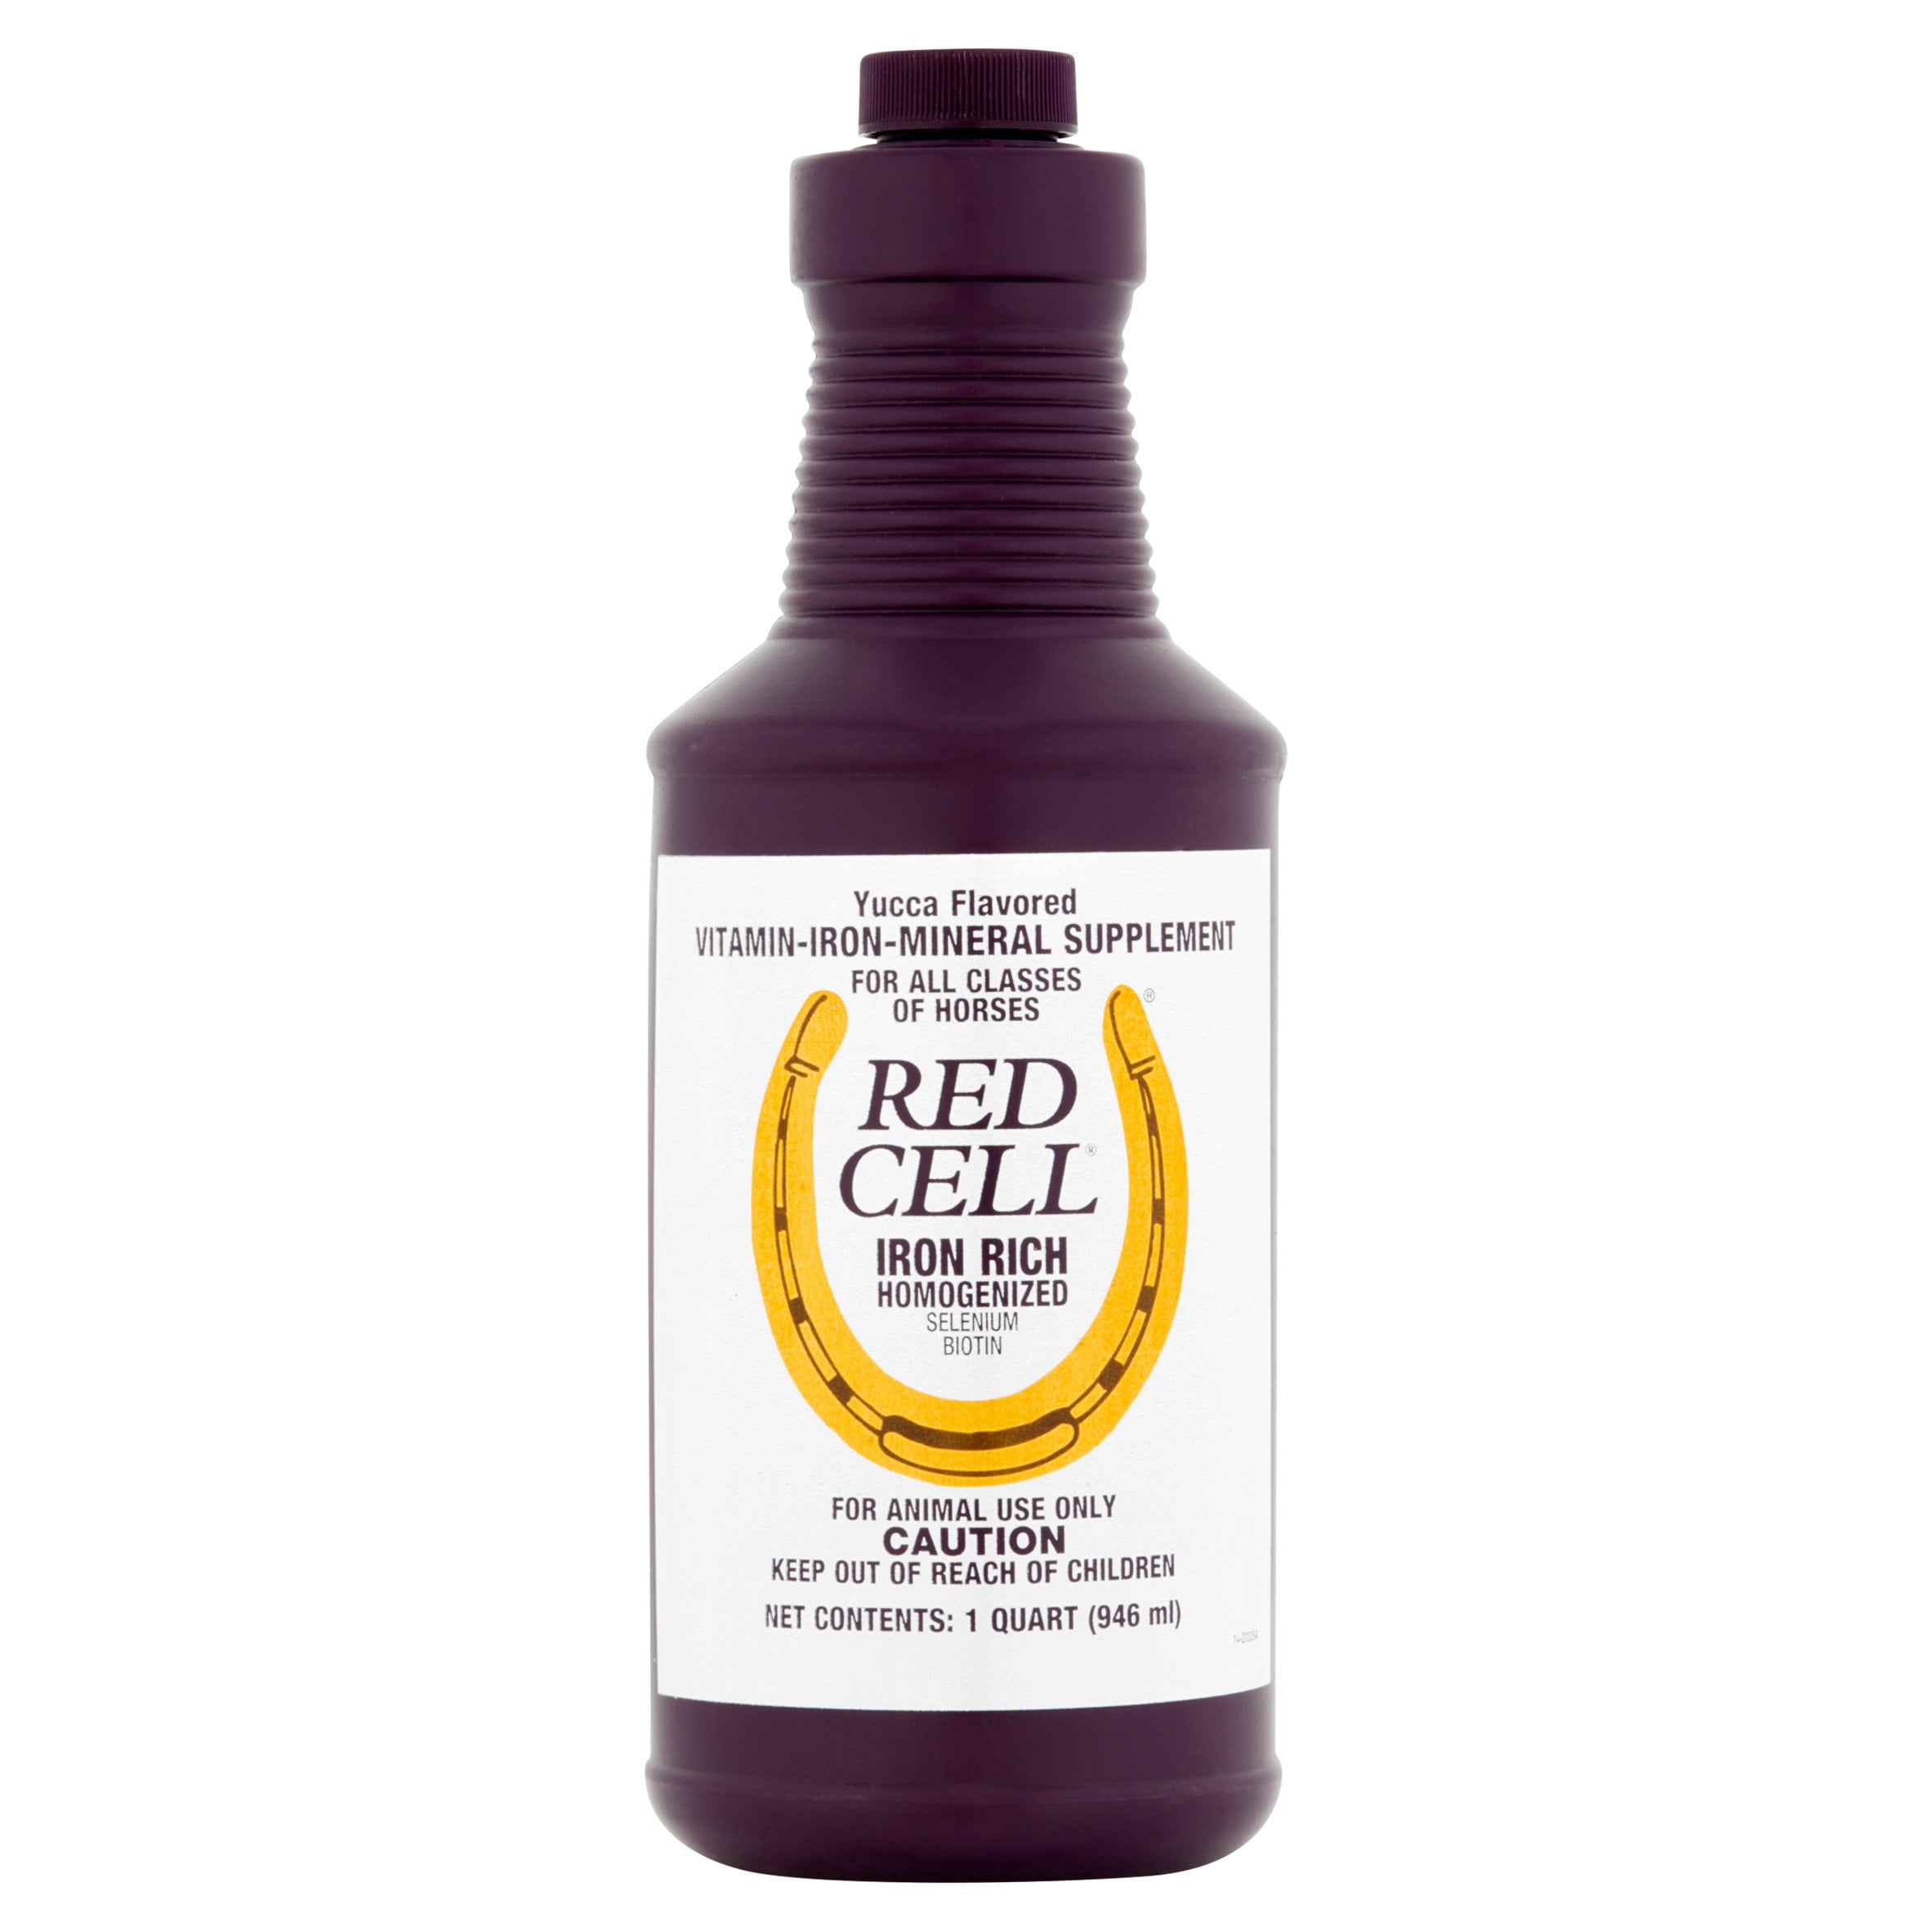 canine red cell for dogs